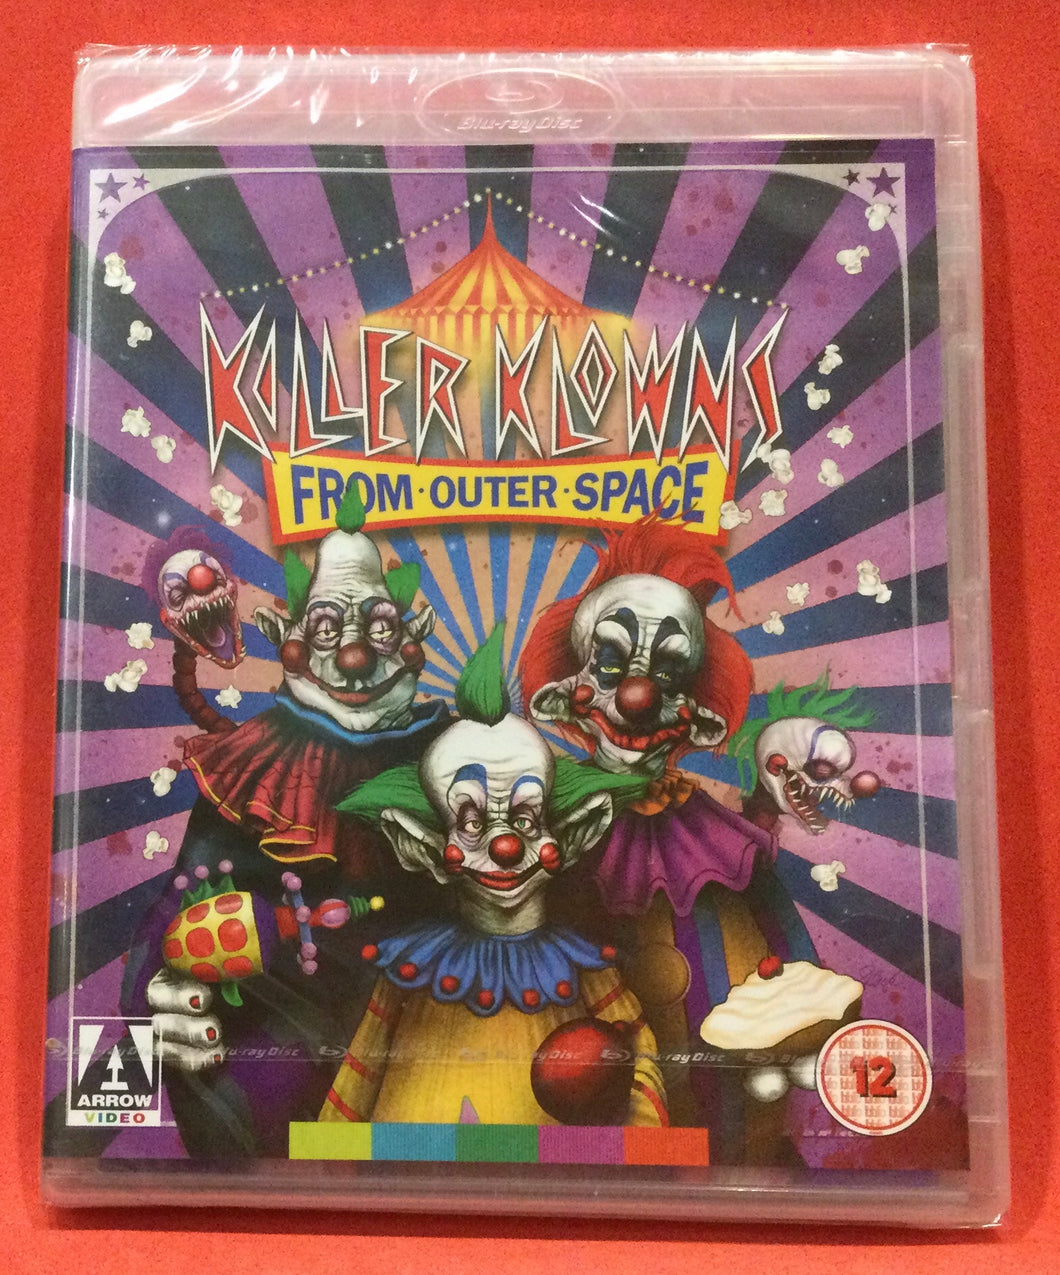 KILLER CLOWNS FROM OUTER SPACE - BLU-RAY (SEALED)